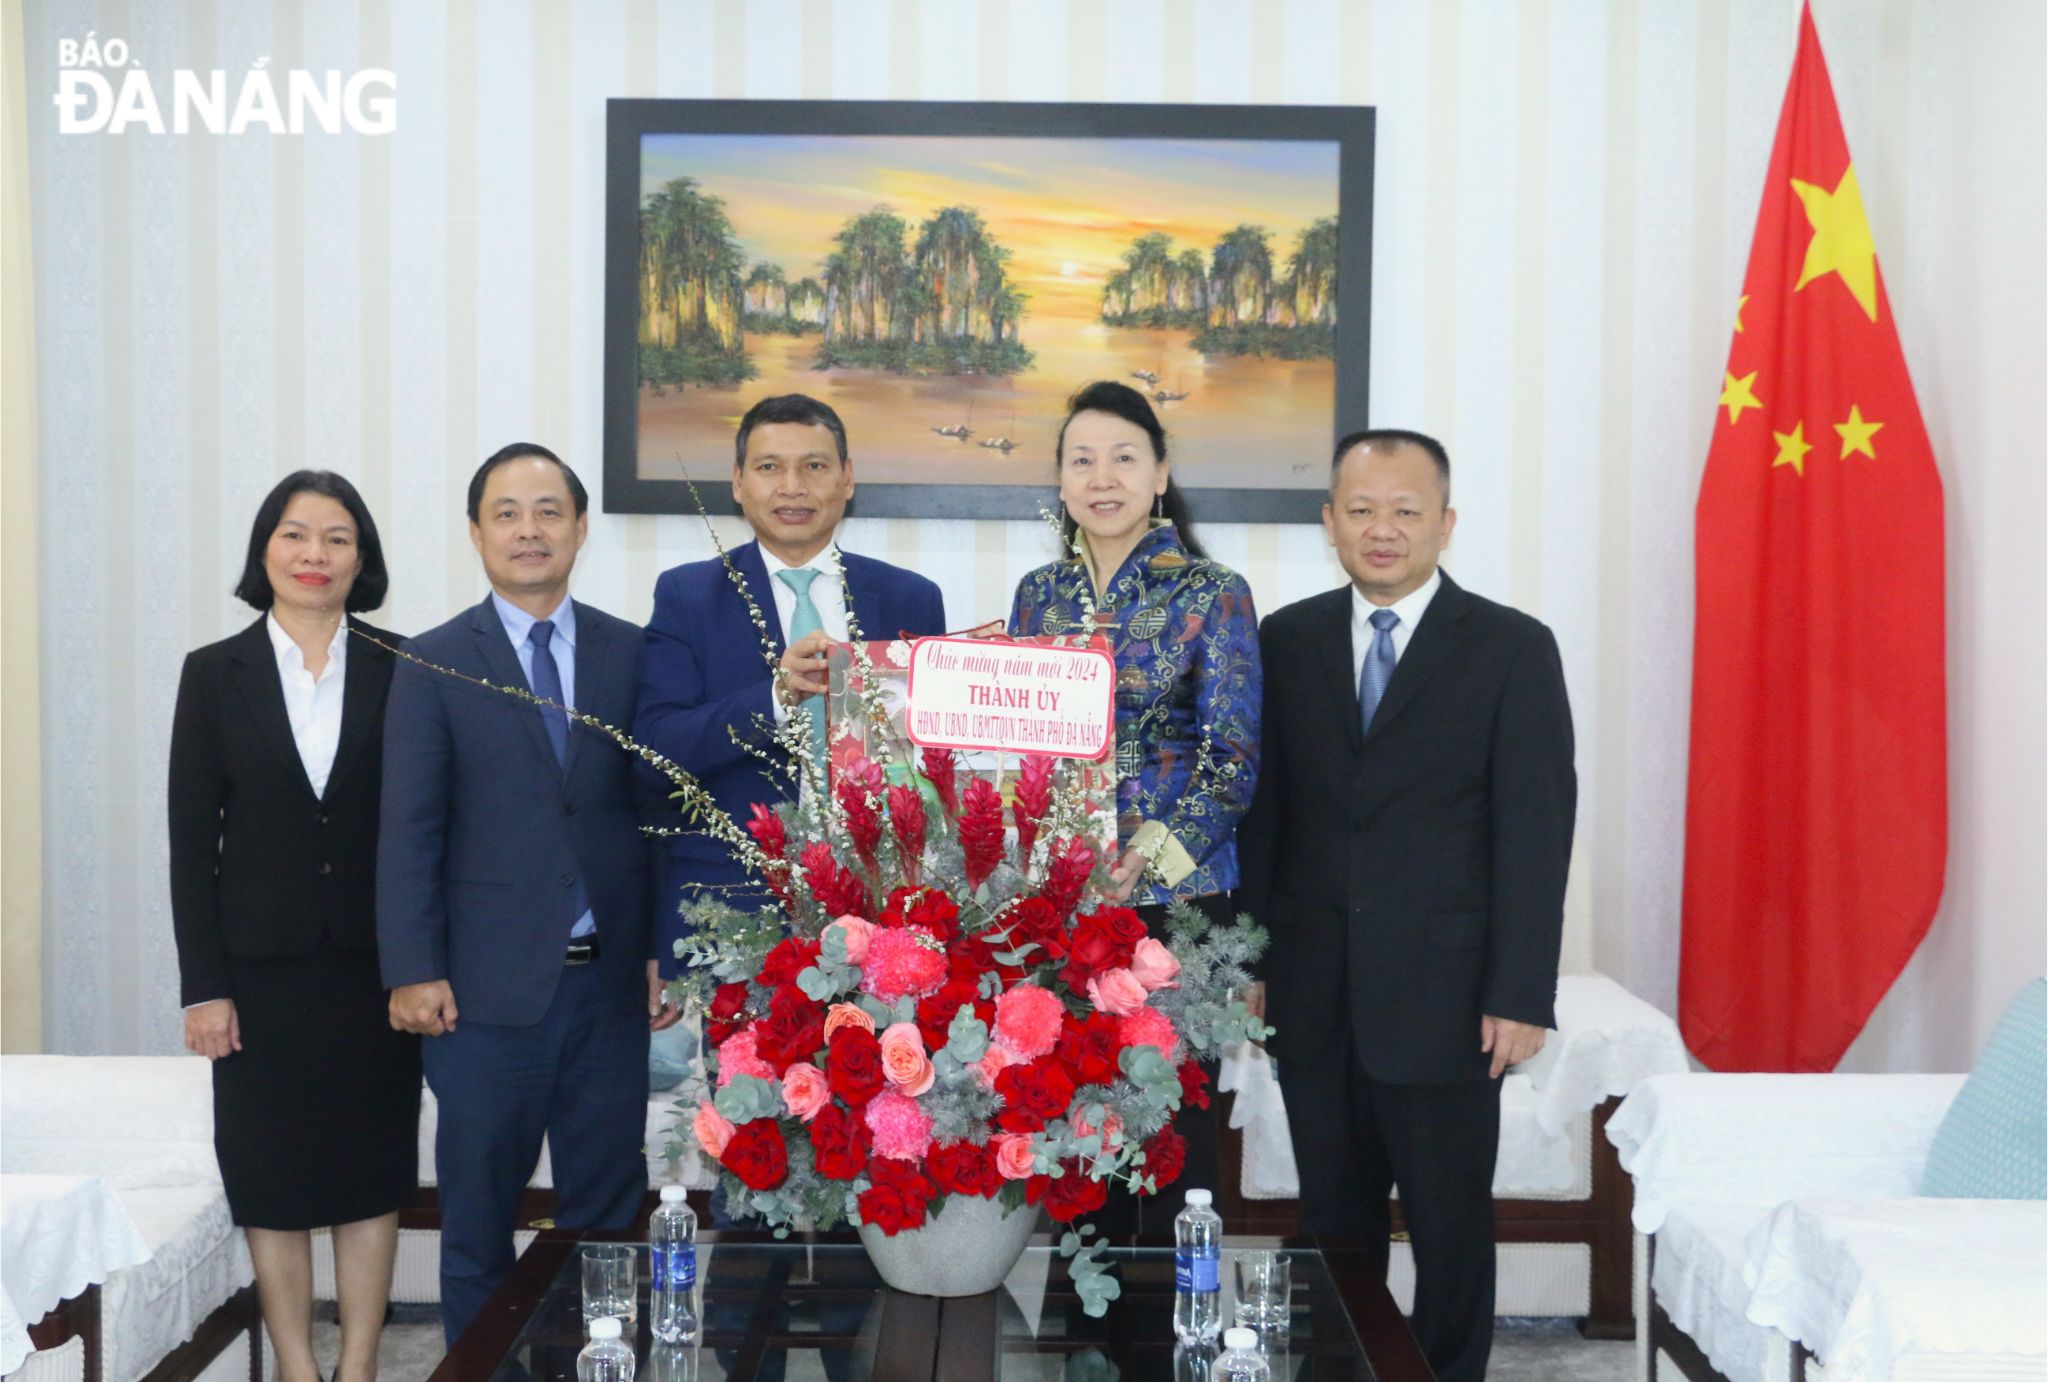 Vice Chairman of the Da Nang People's Committee Ho Ky Minh (3rd, left) presenting flowers to congratulate the 2024 Lunar New Year of the Dragon to the Consul General and staff of the Chinese Consulate General in Da Nang. Photo: T.PHUONG